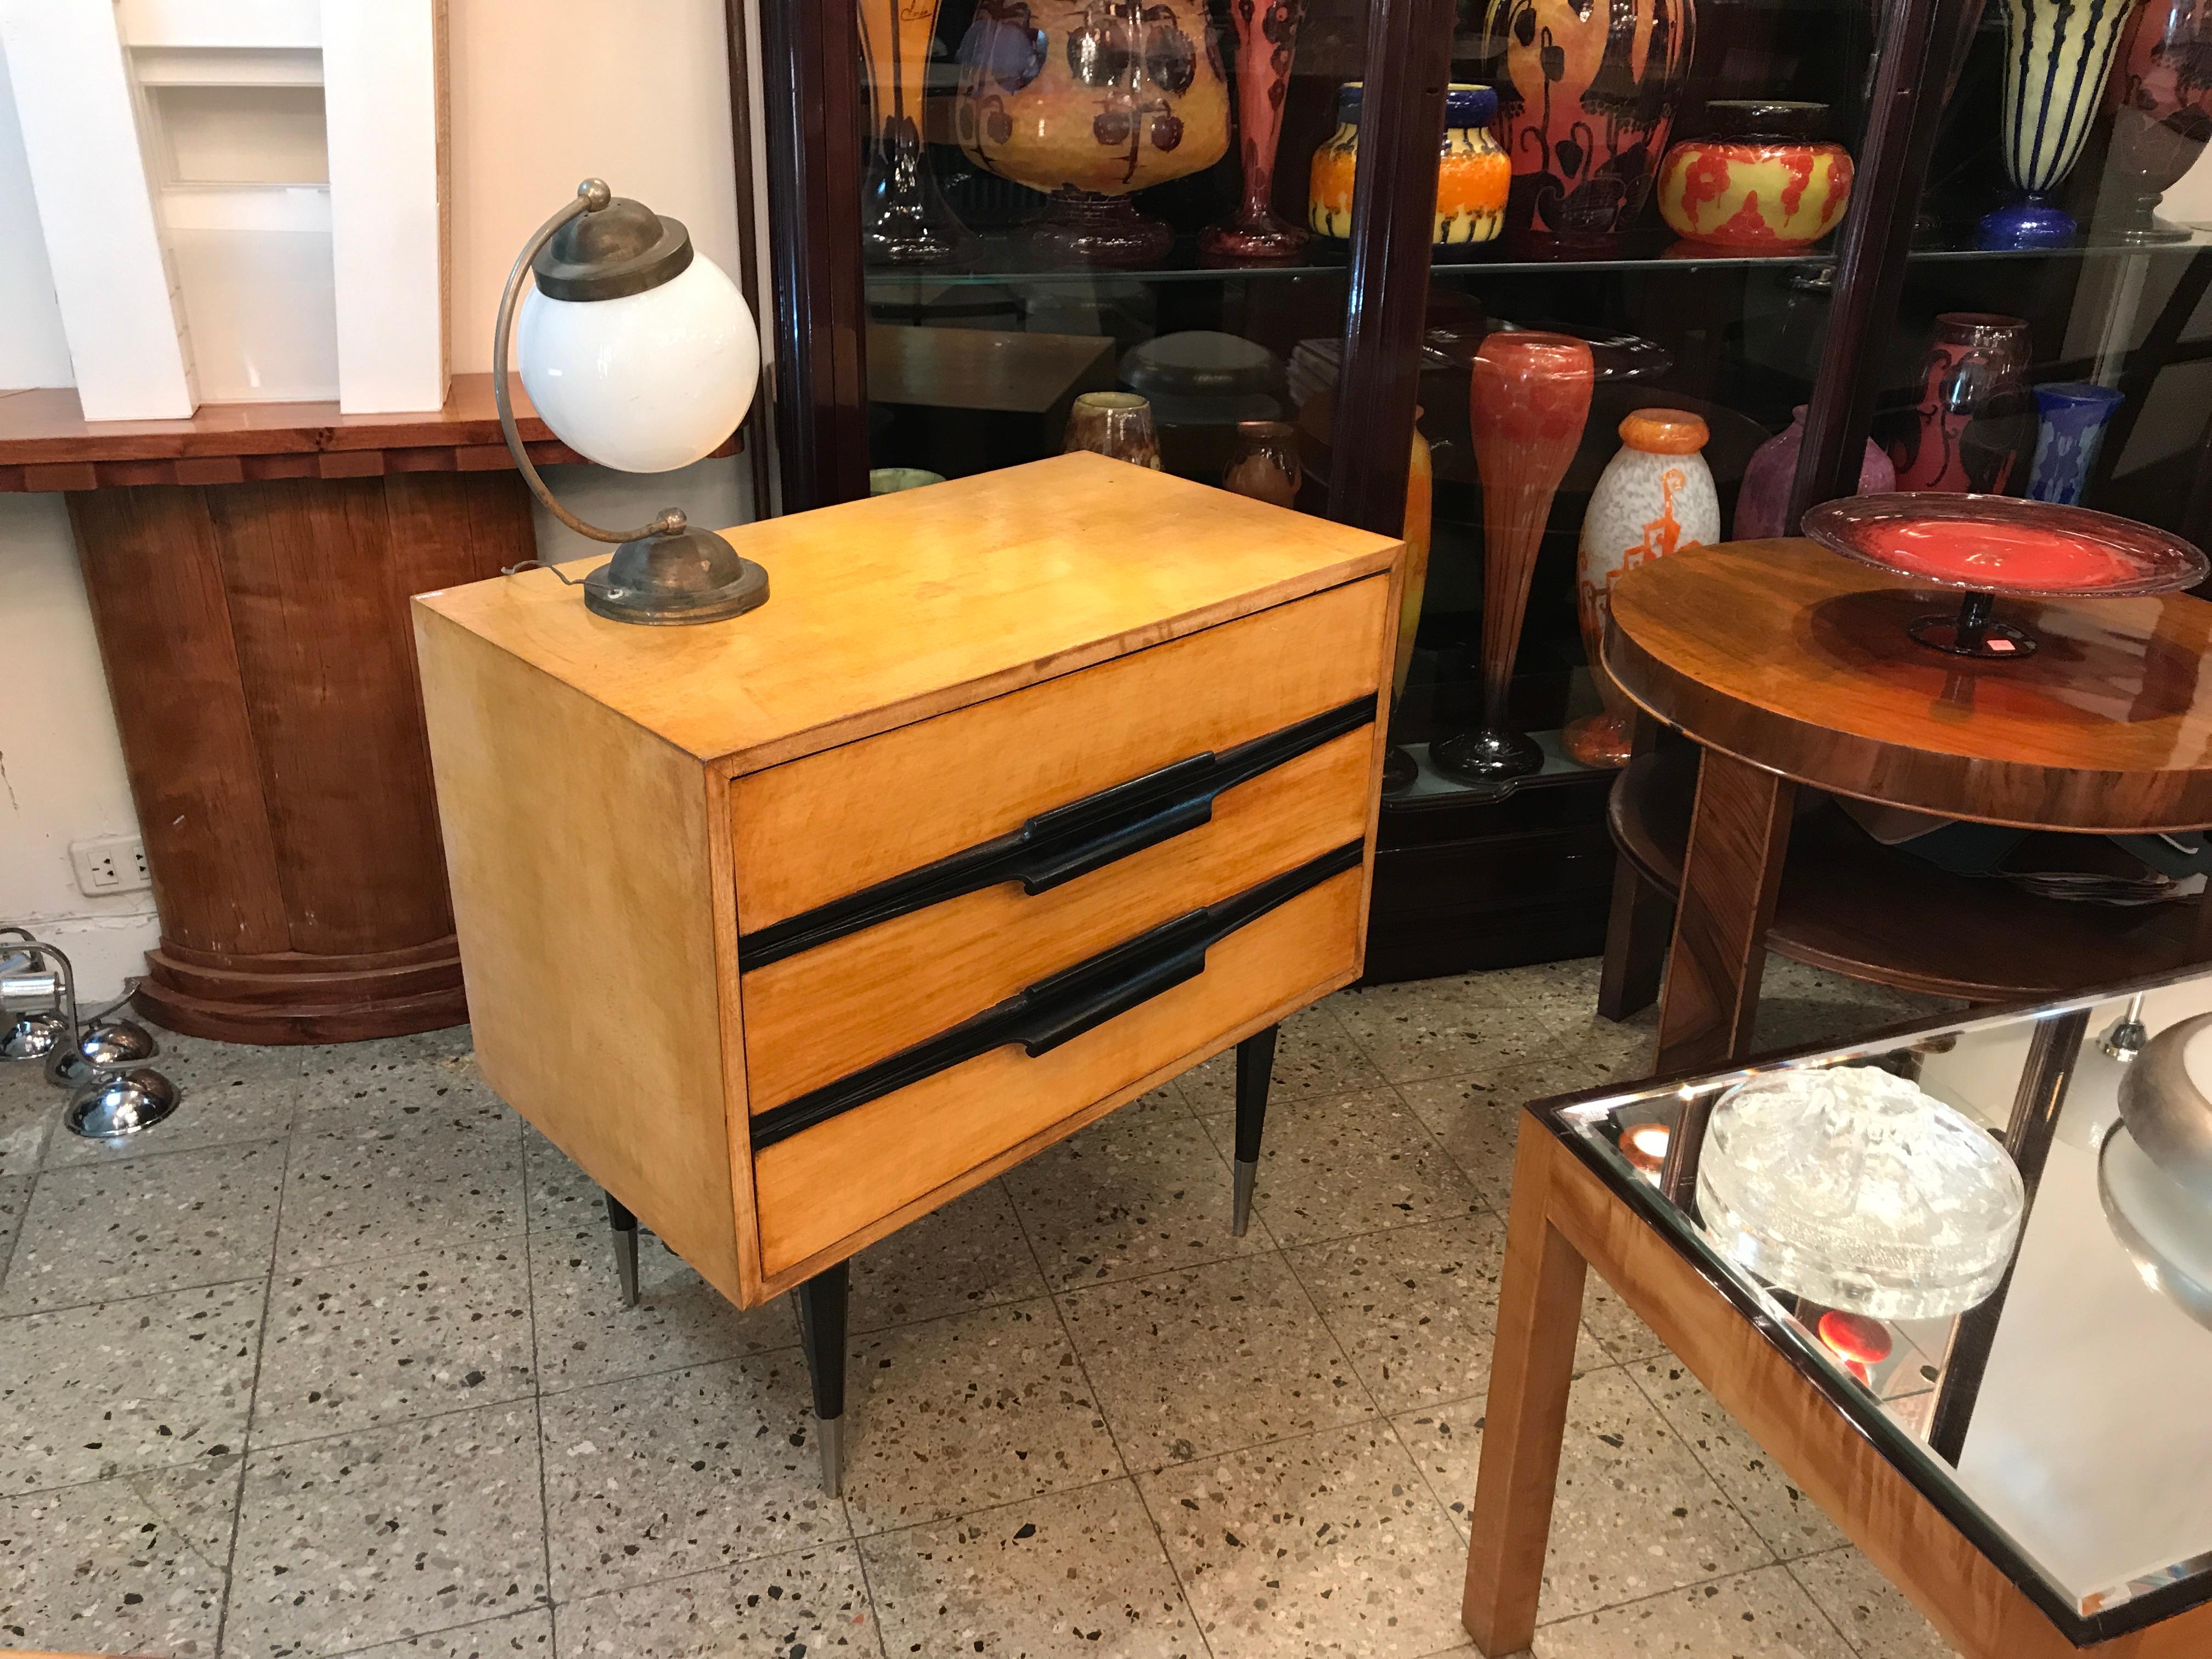 2 American tables
Year: 1960
Material: parchment (Leather) and wood
3 Drawers
It is an elegant and sophisticated tables.
You want to live in the golden years, this is the dining table that your project needs.
We have specialized in the sale of Art